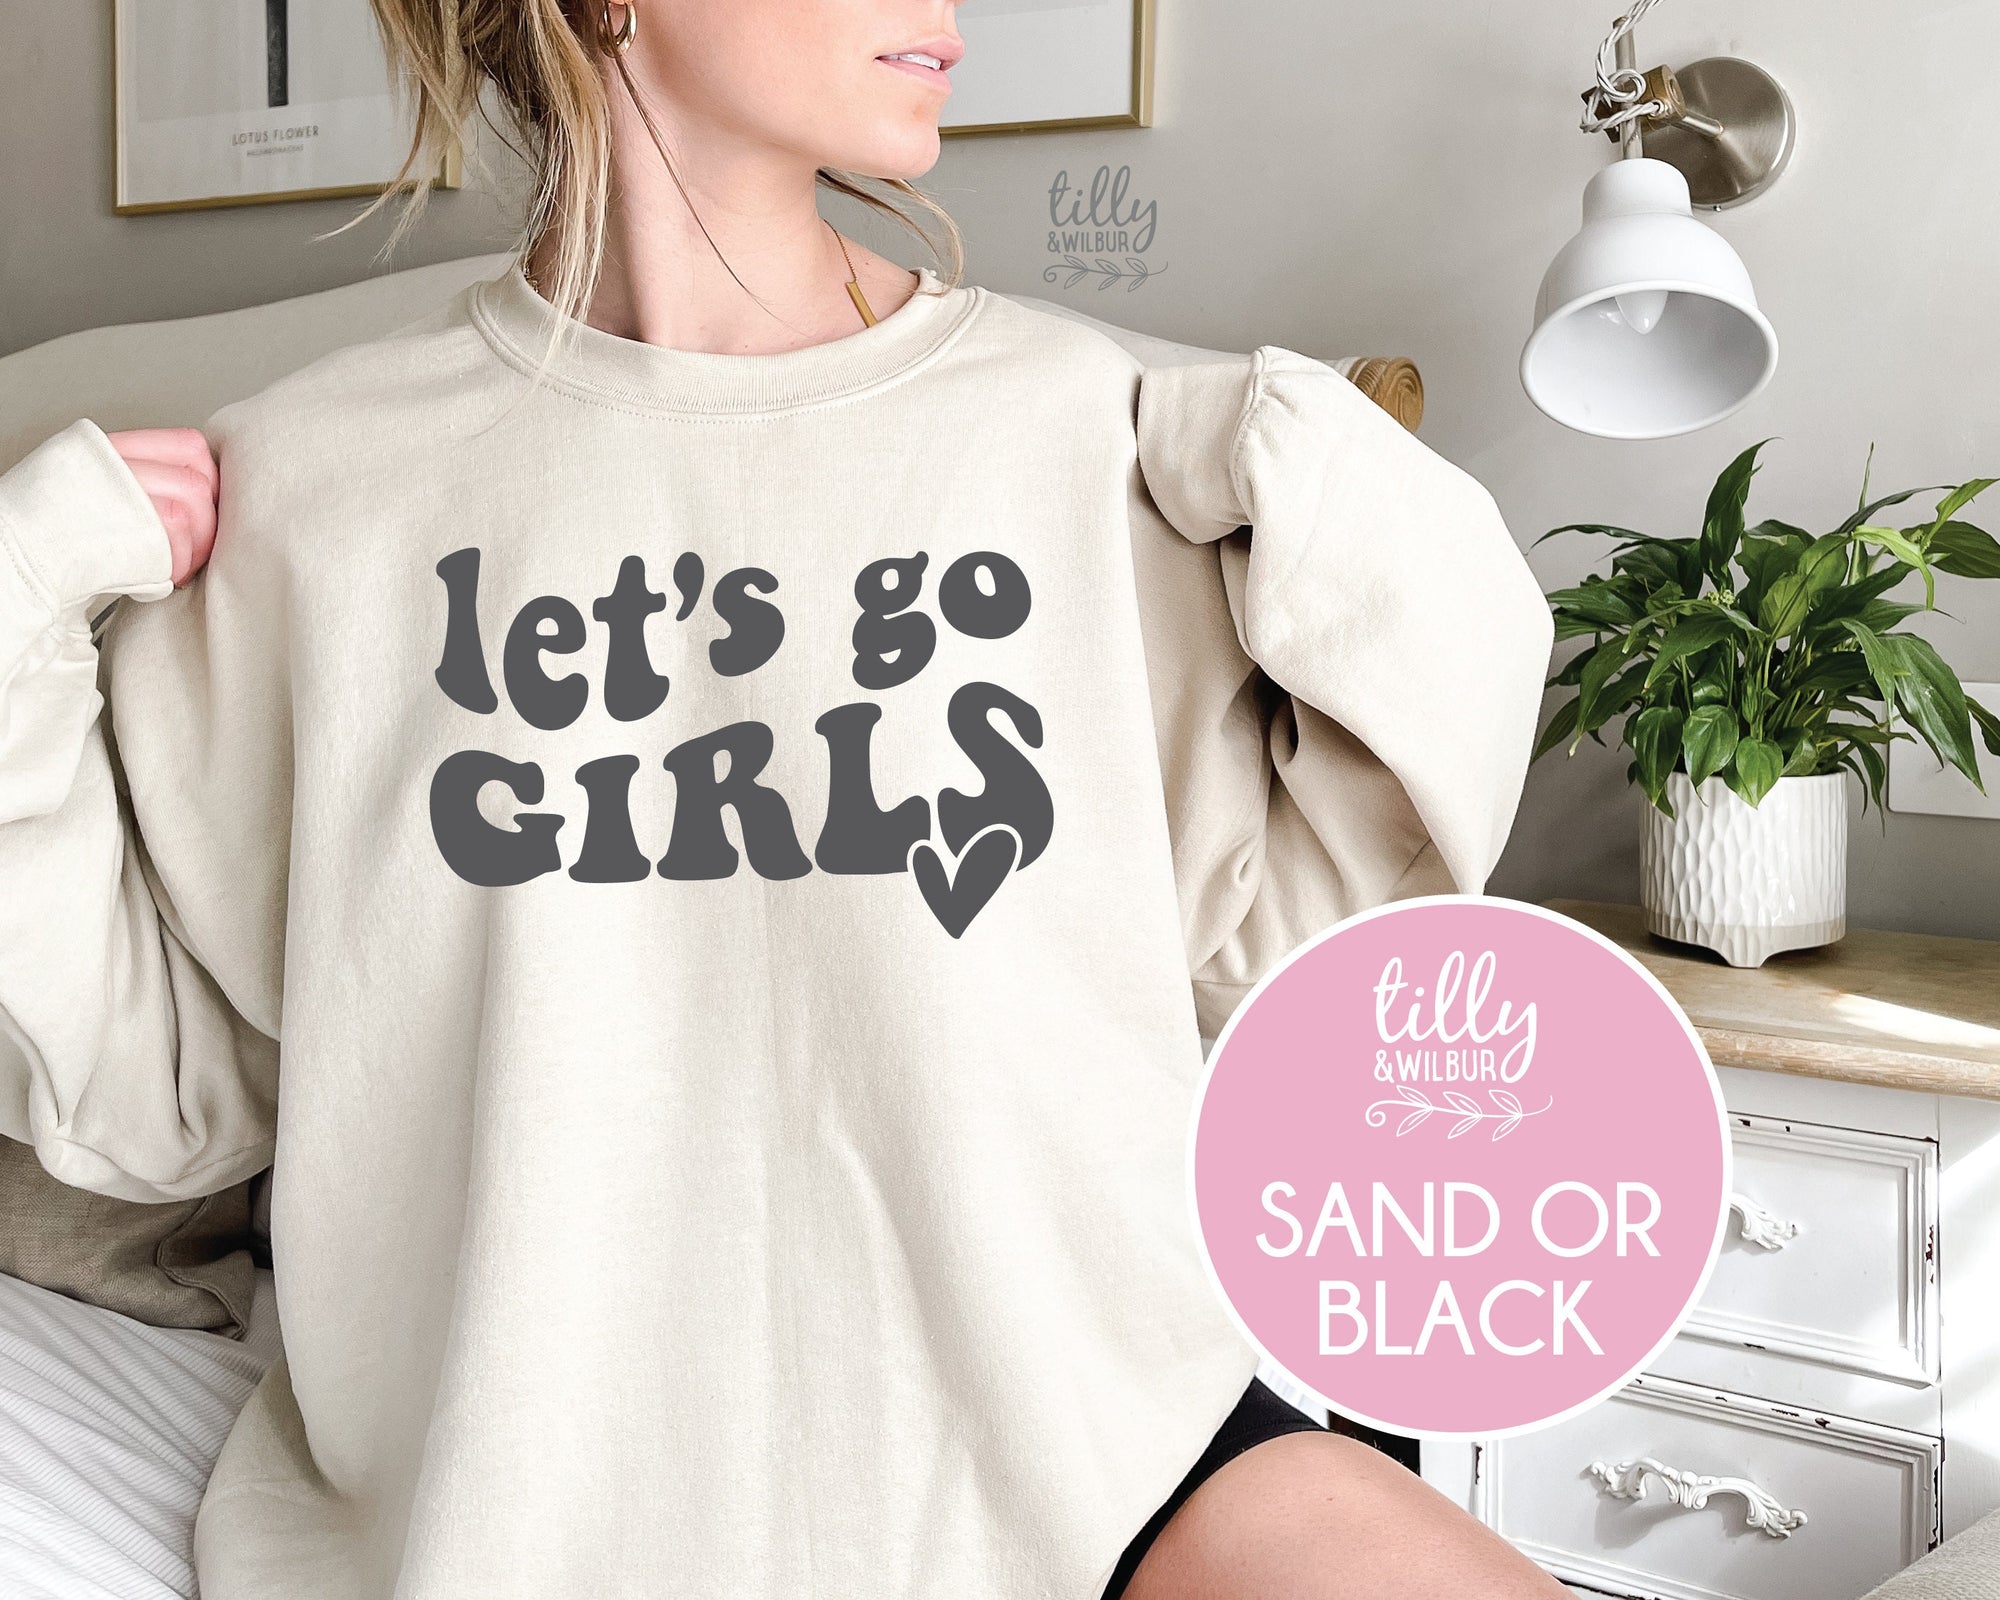 Let's Go Girls Jumper, Country Music Sweatshirt, Girls Trip Sweater, Matching Girls Weekend, Country, Bachelorette Party, Team Bride, Bridal